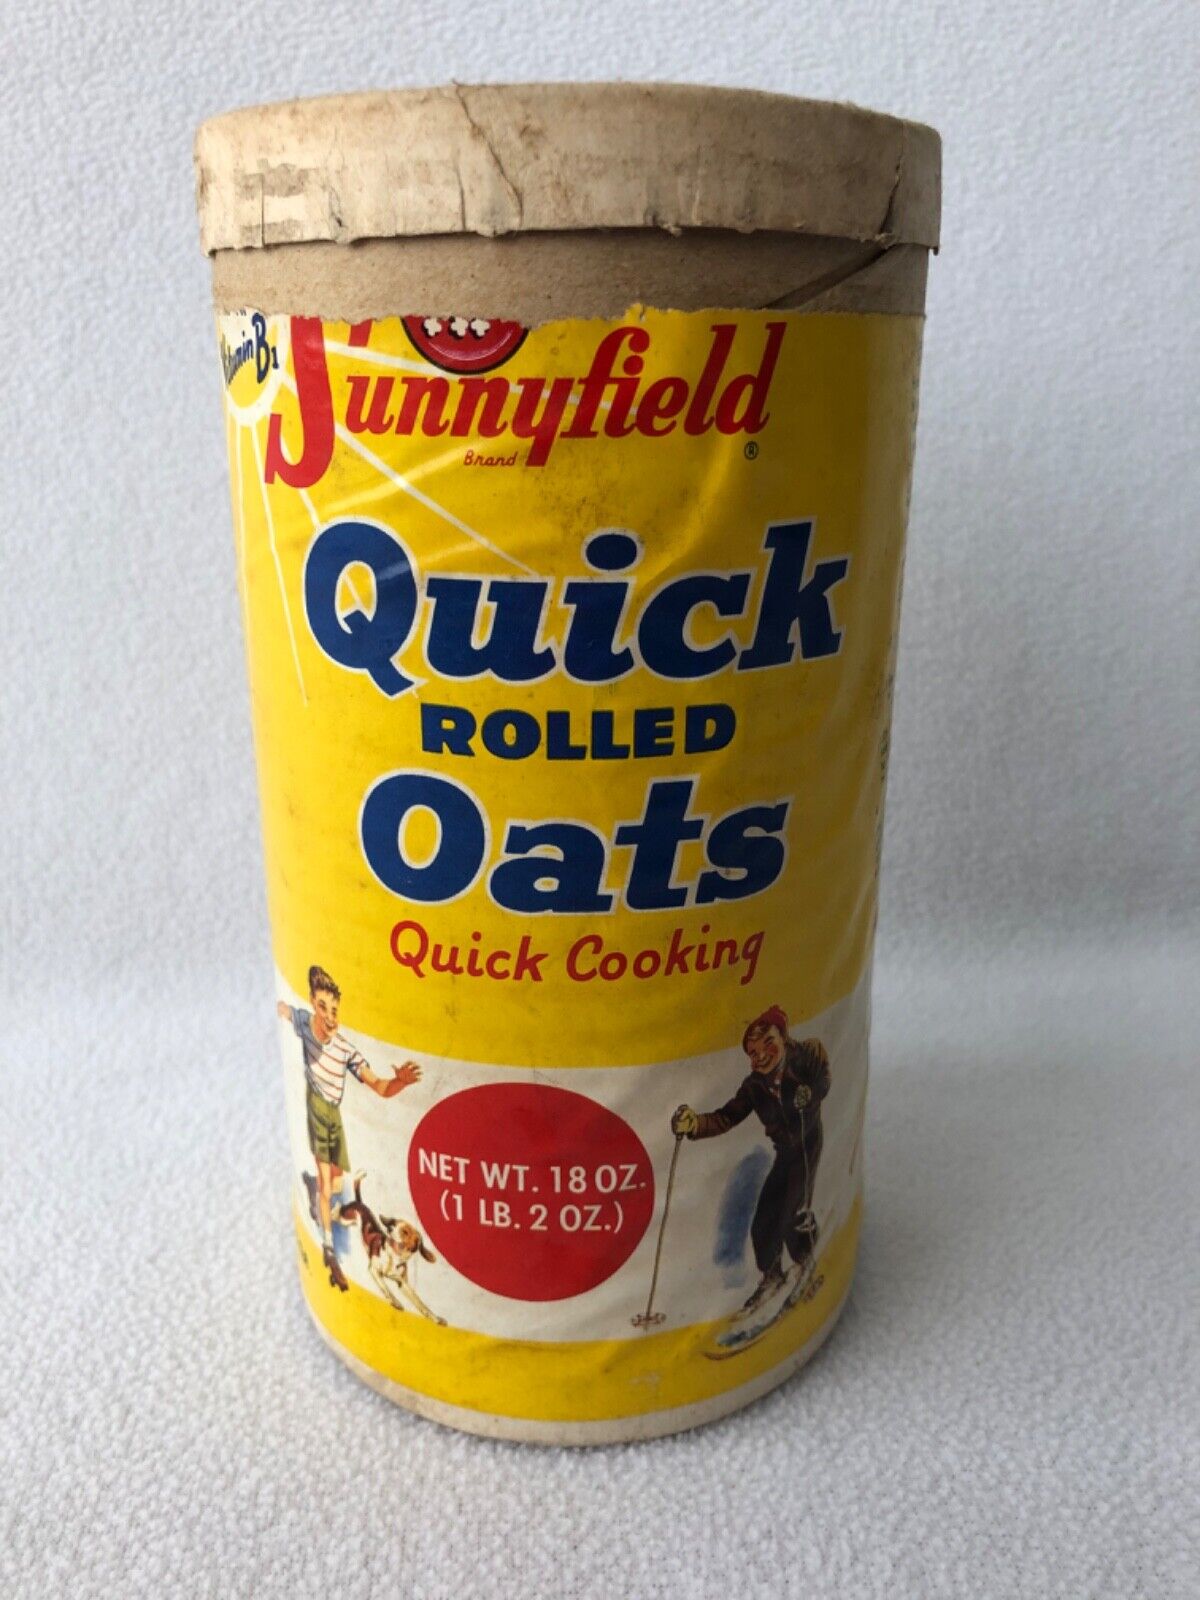 Vintage Sunnyfield Quick Oats Cardboard Container Different Design on Each Side